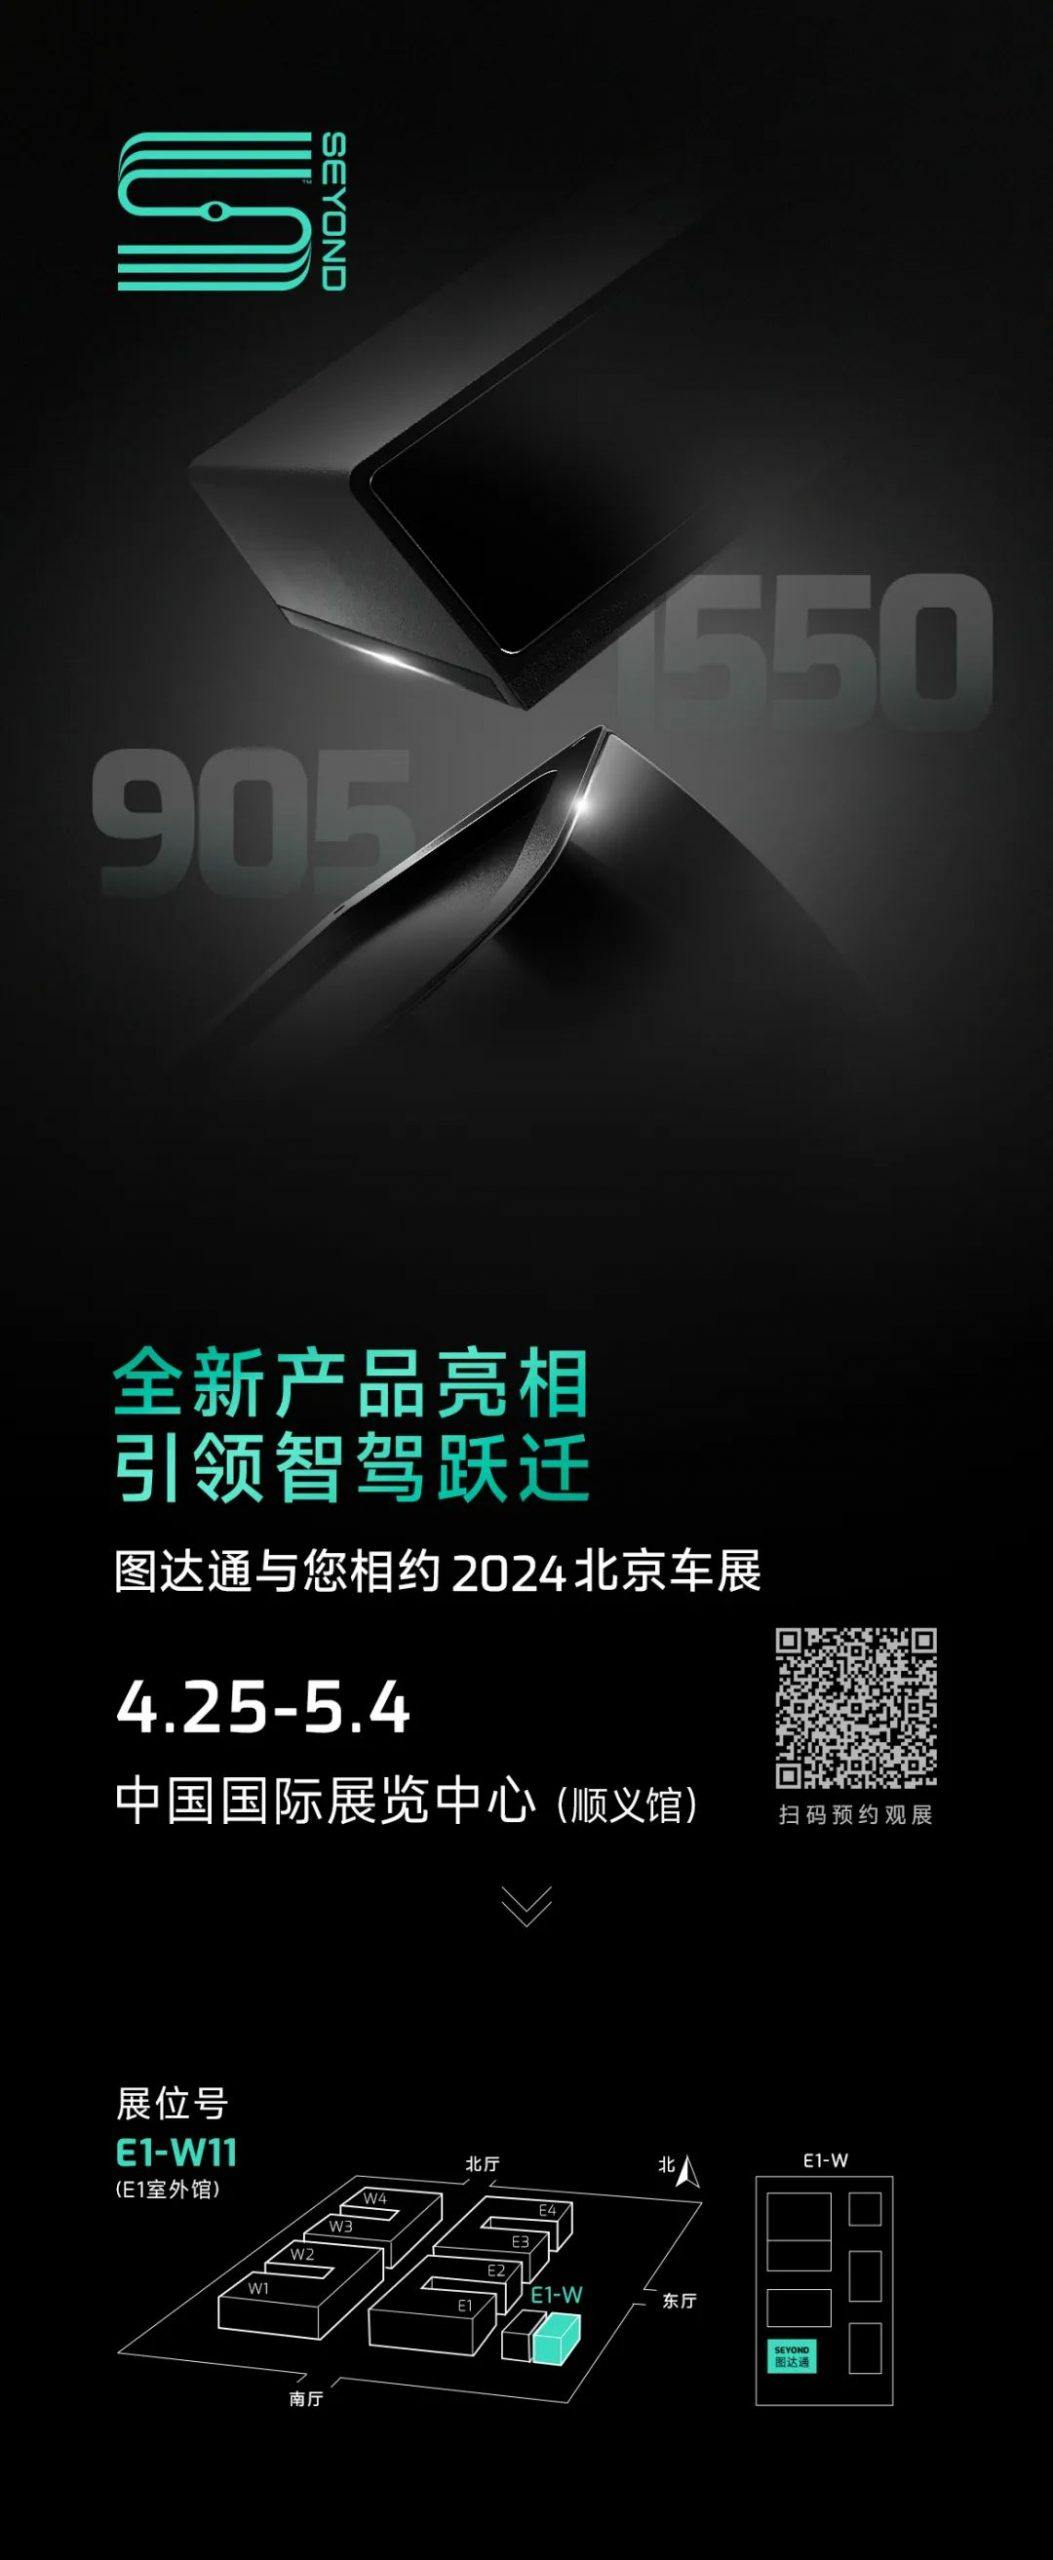 Seyond new product debut! Meet you at the 2024 Beijing Auto Show